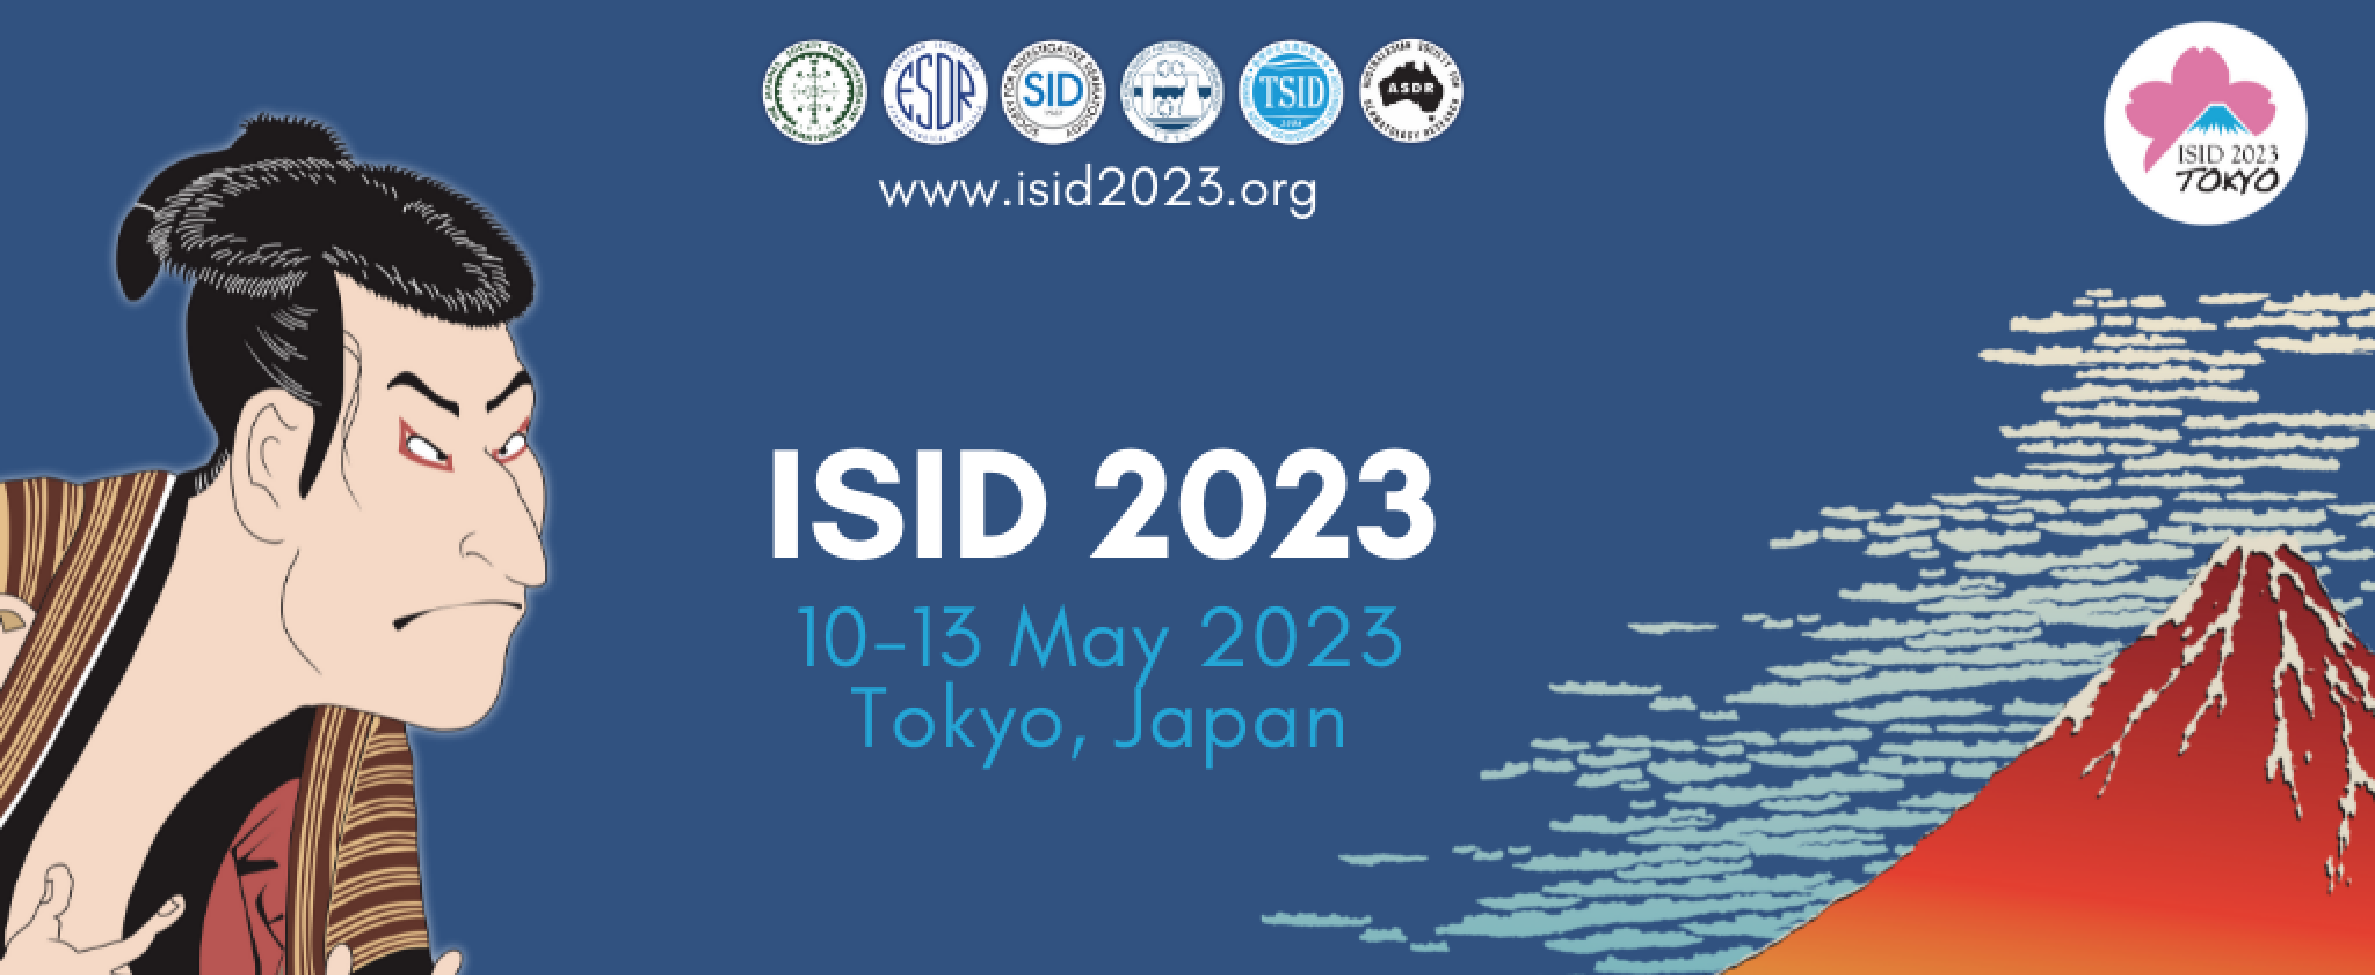 First International Societies For Investigative Dermatology Meeting - ISID 2023